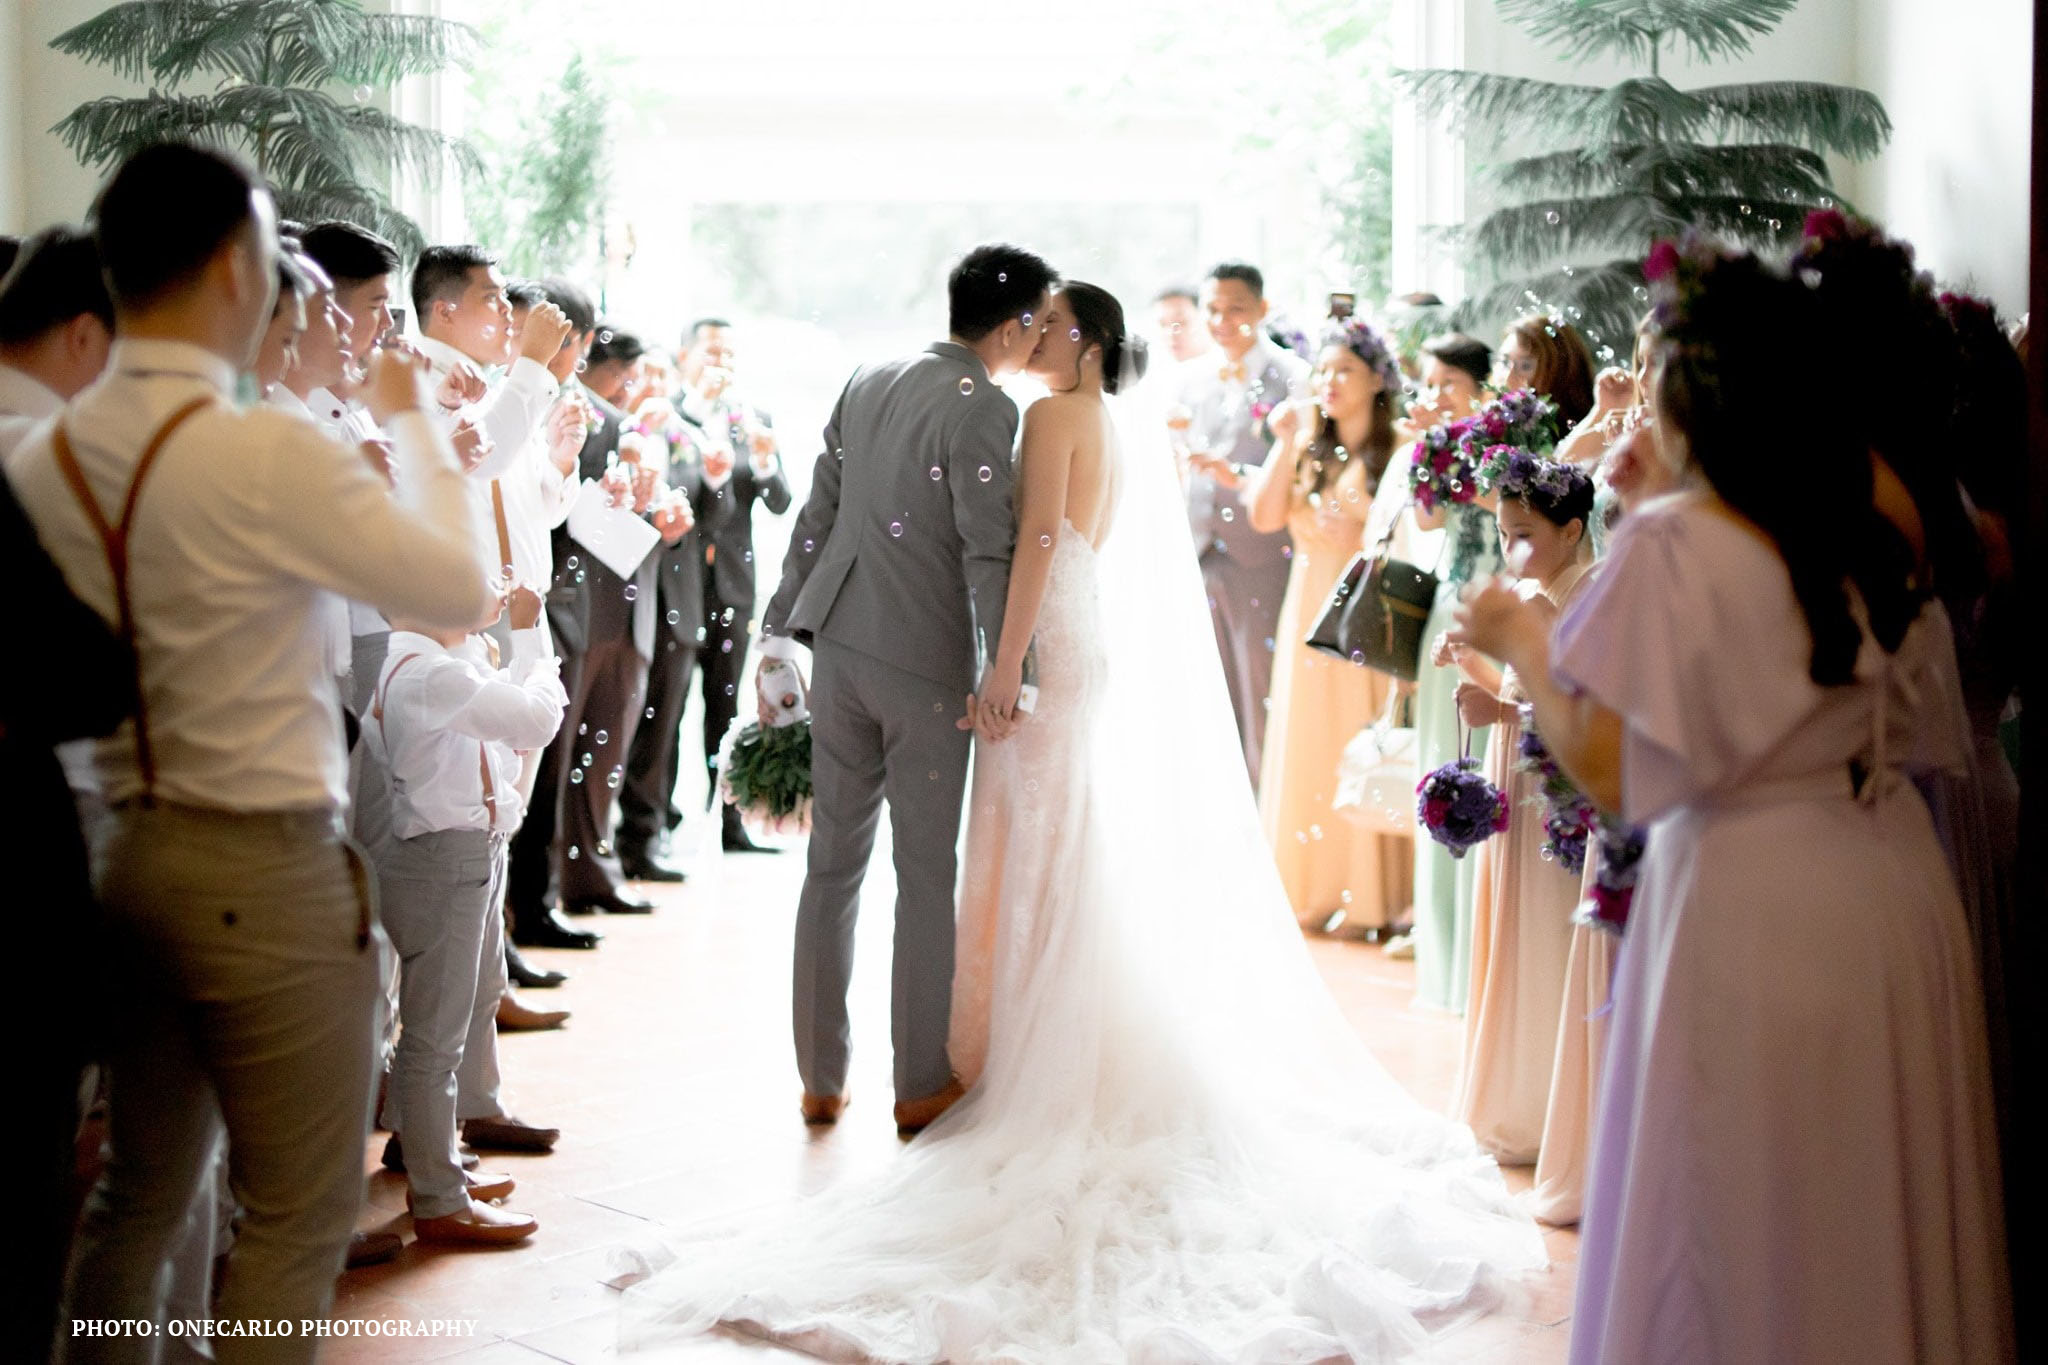 Town's Delight Tagaytay Wedding Venues and Themes